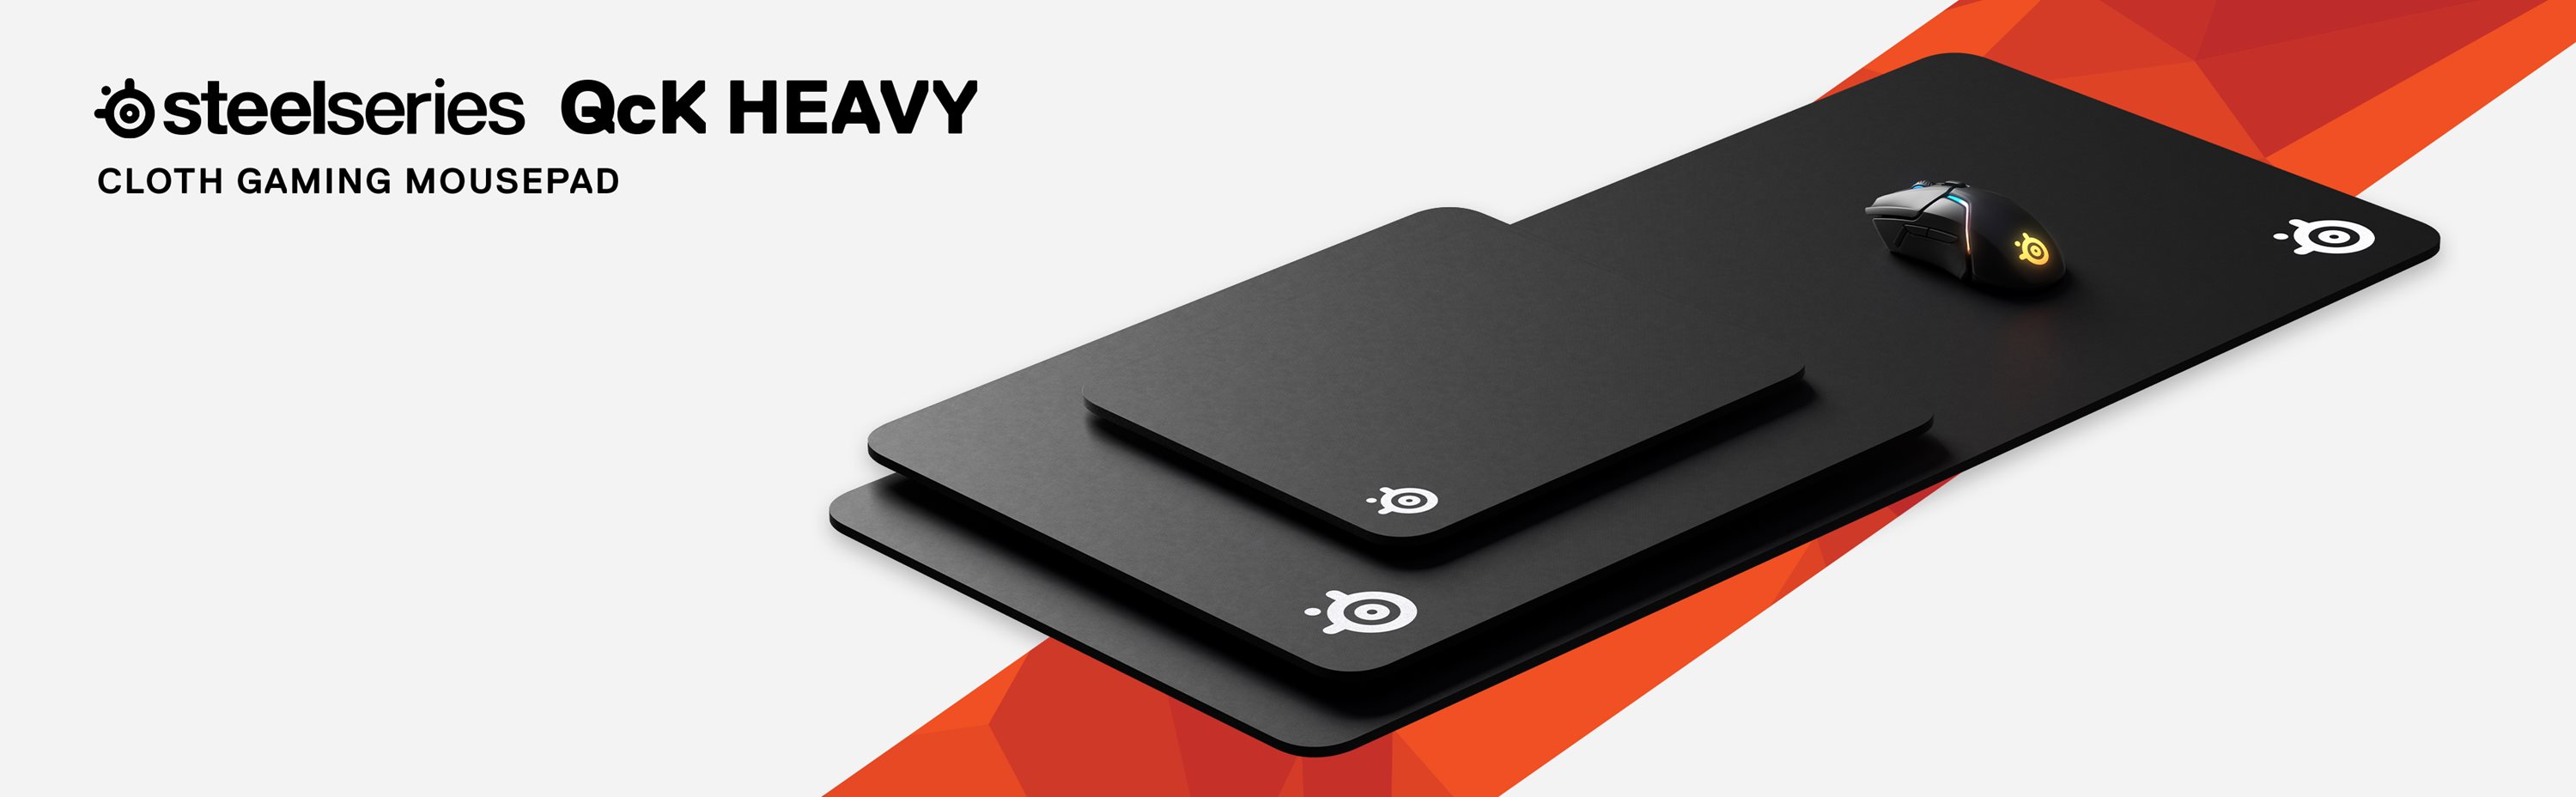 SteelSeries QcK Heavy - Cloth Gaming Mouse Pad - Extra Thick Non-Slip  Rubber Pad - Exclusive Microfiber Surface - Size M PC